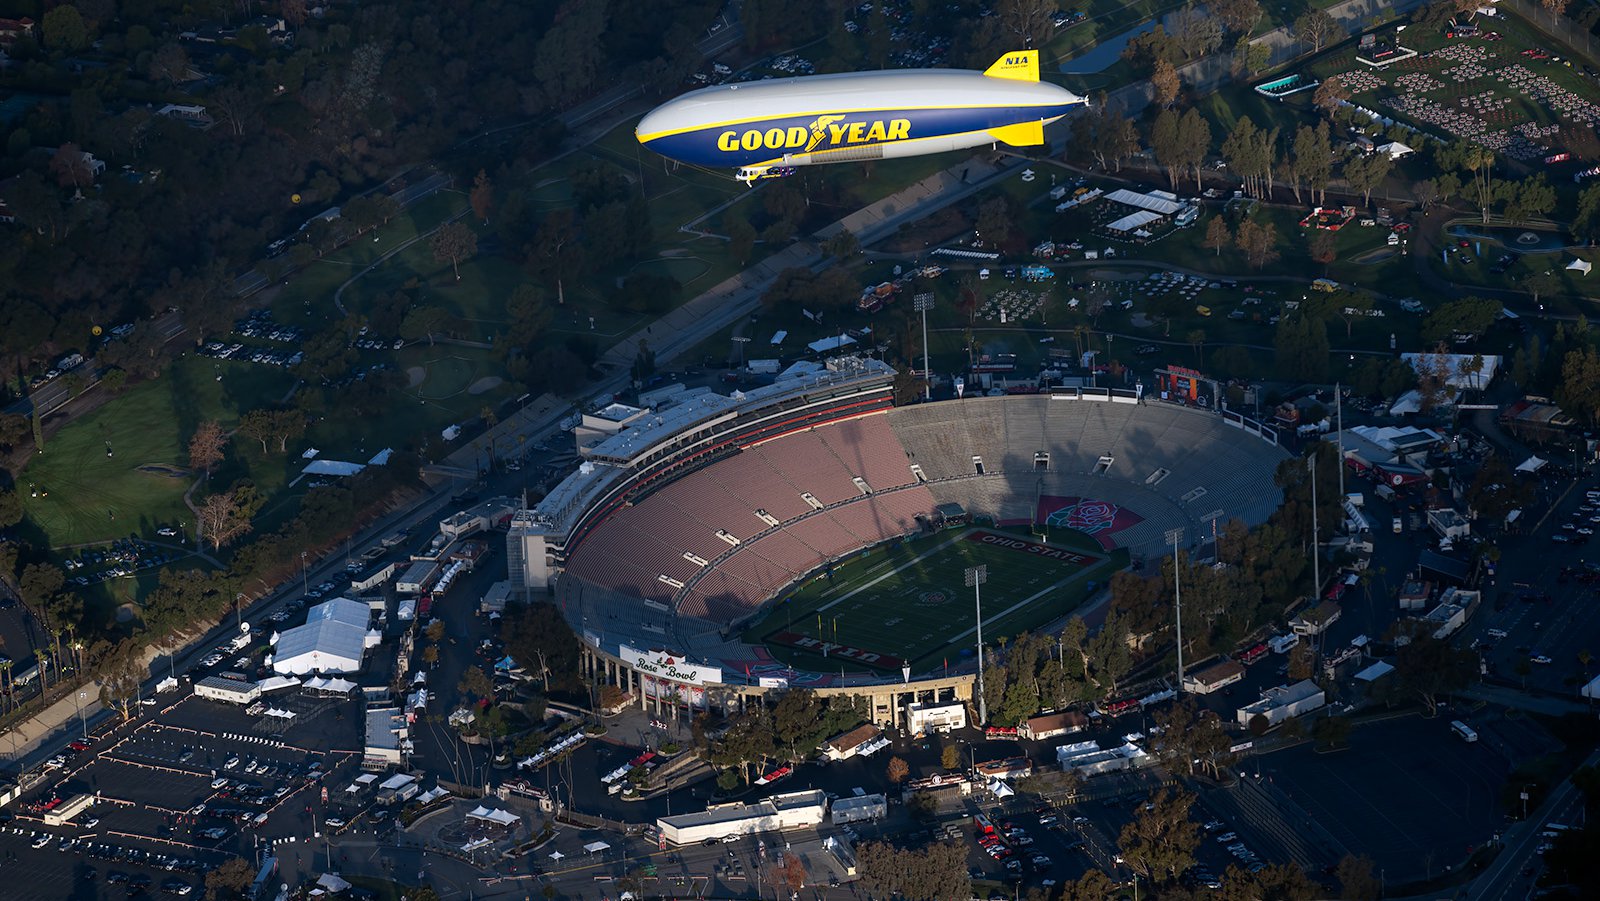 Blog photo of the Goodyear Blimp flying over the Rose Bowl Stadium in the early morning on New Years Day 2022